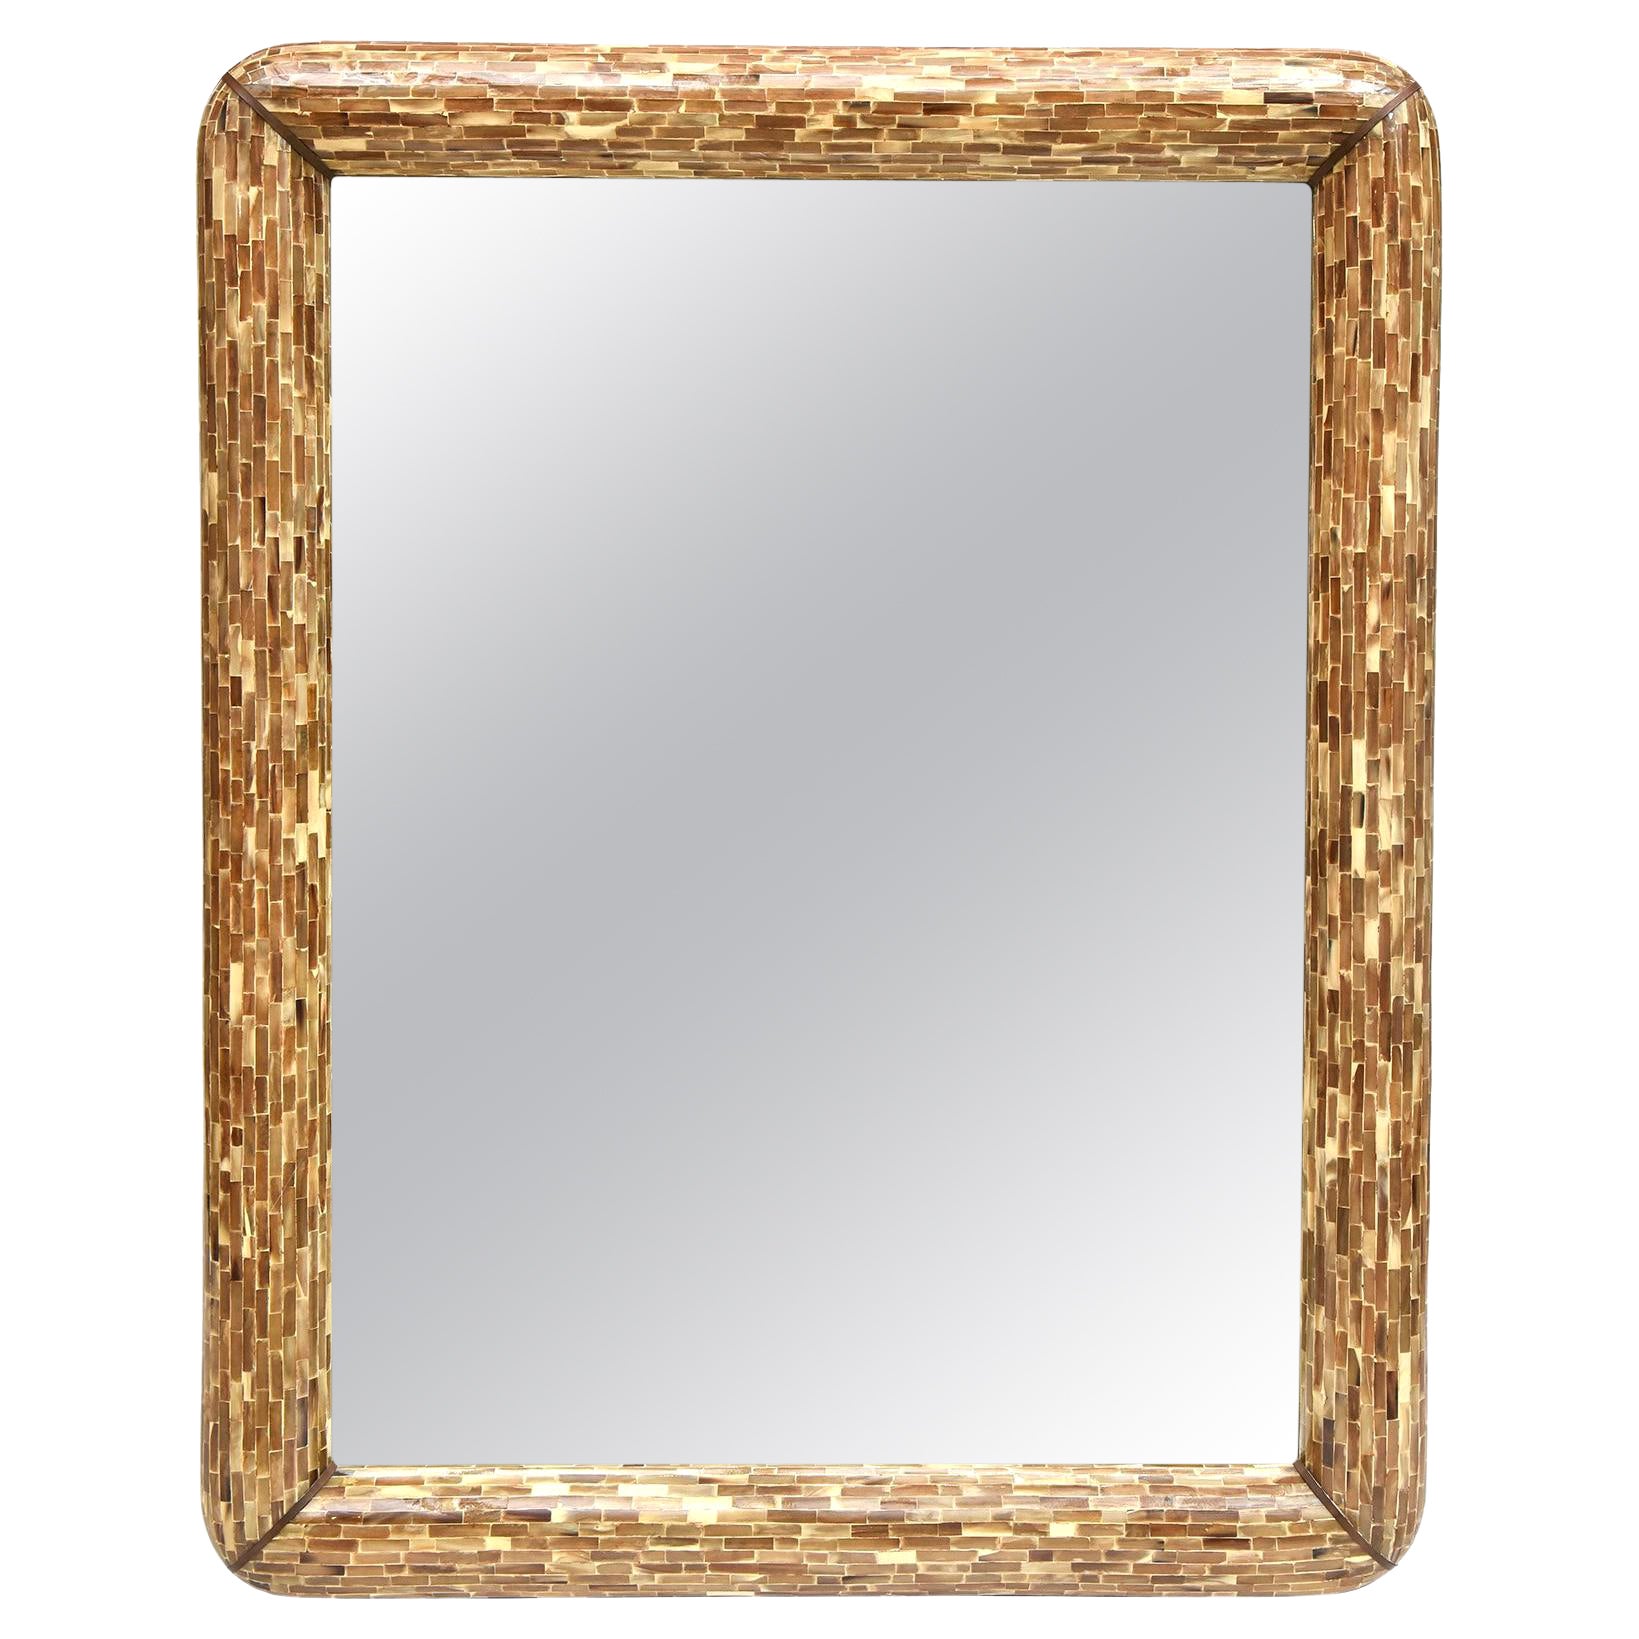 Tessellated Horn Mirror with Brass Trim By Enrique Garces, Circa 1980 For Sale